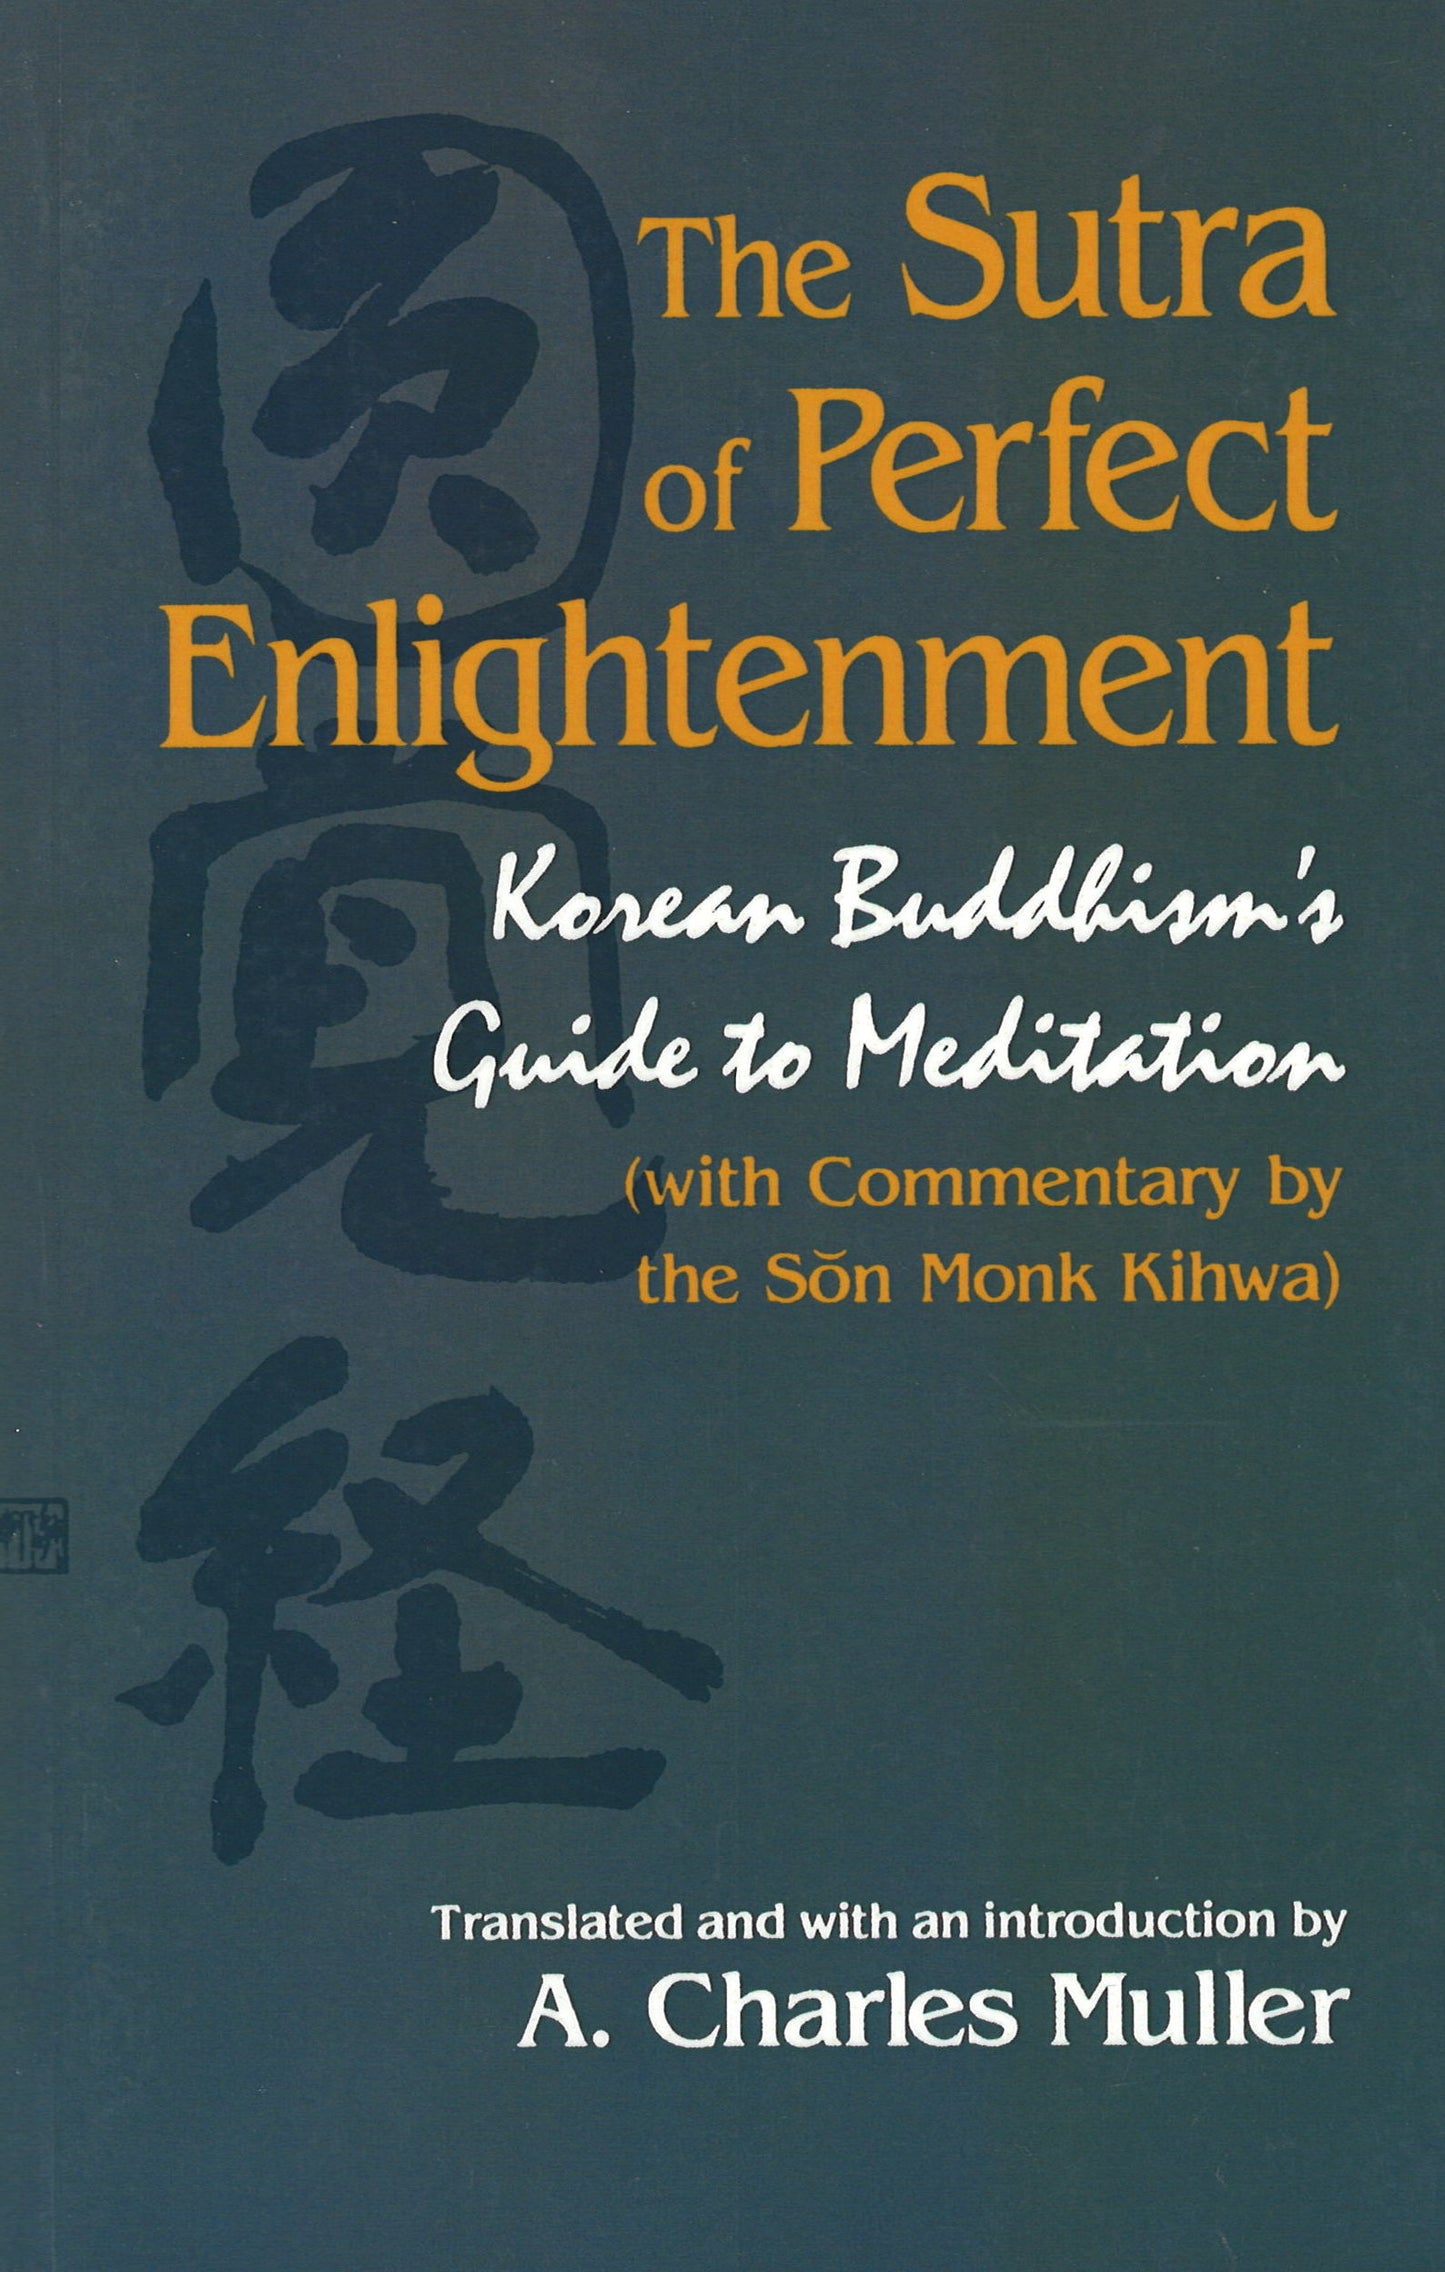 The Sutra of Perfect Enlightenment